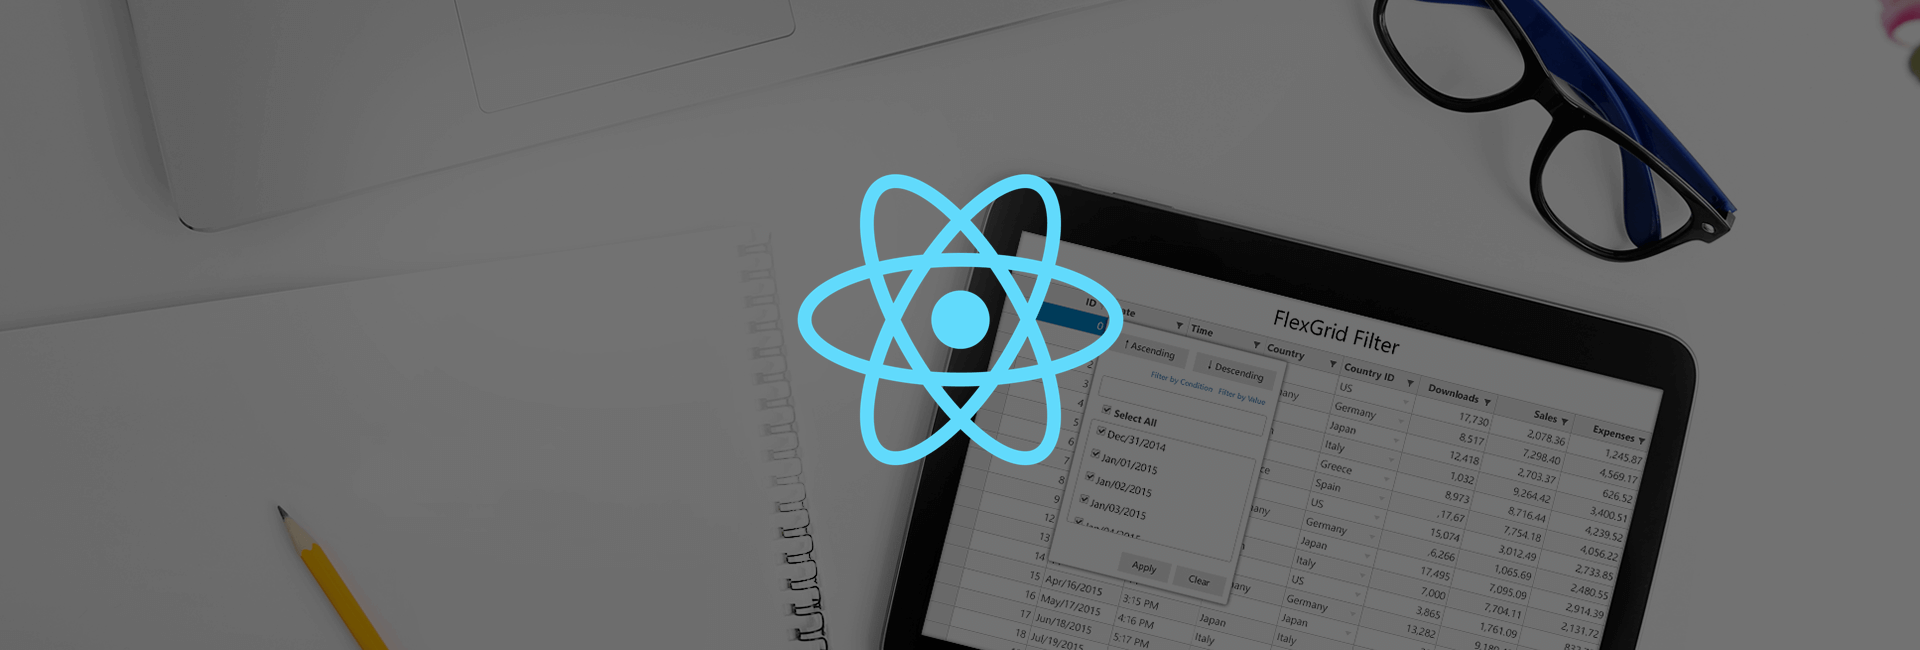 React Cell Templates for the FlexGrid